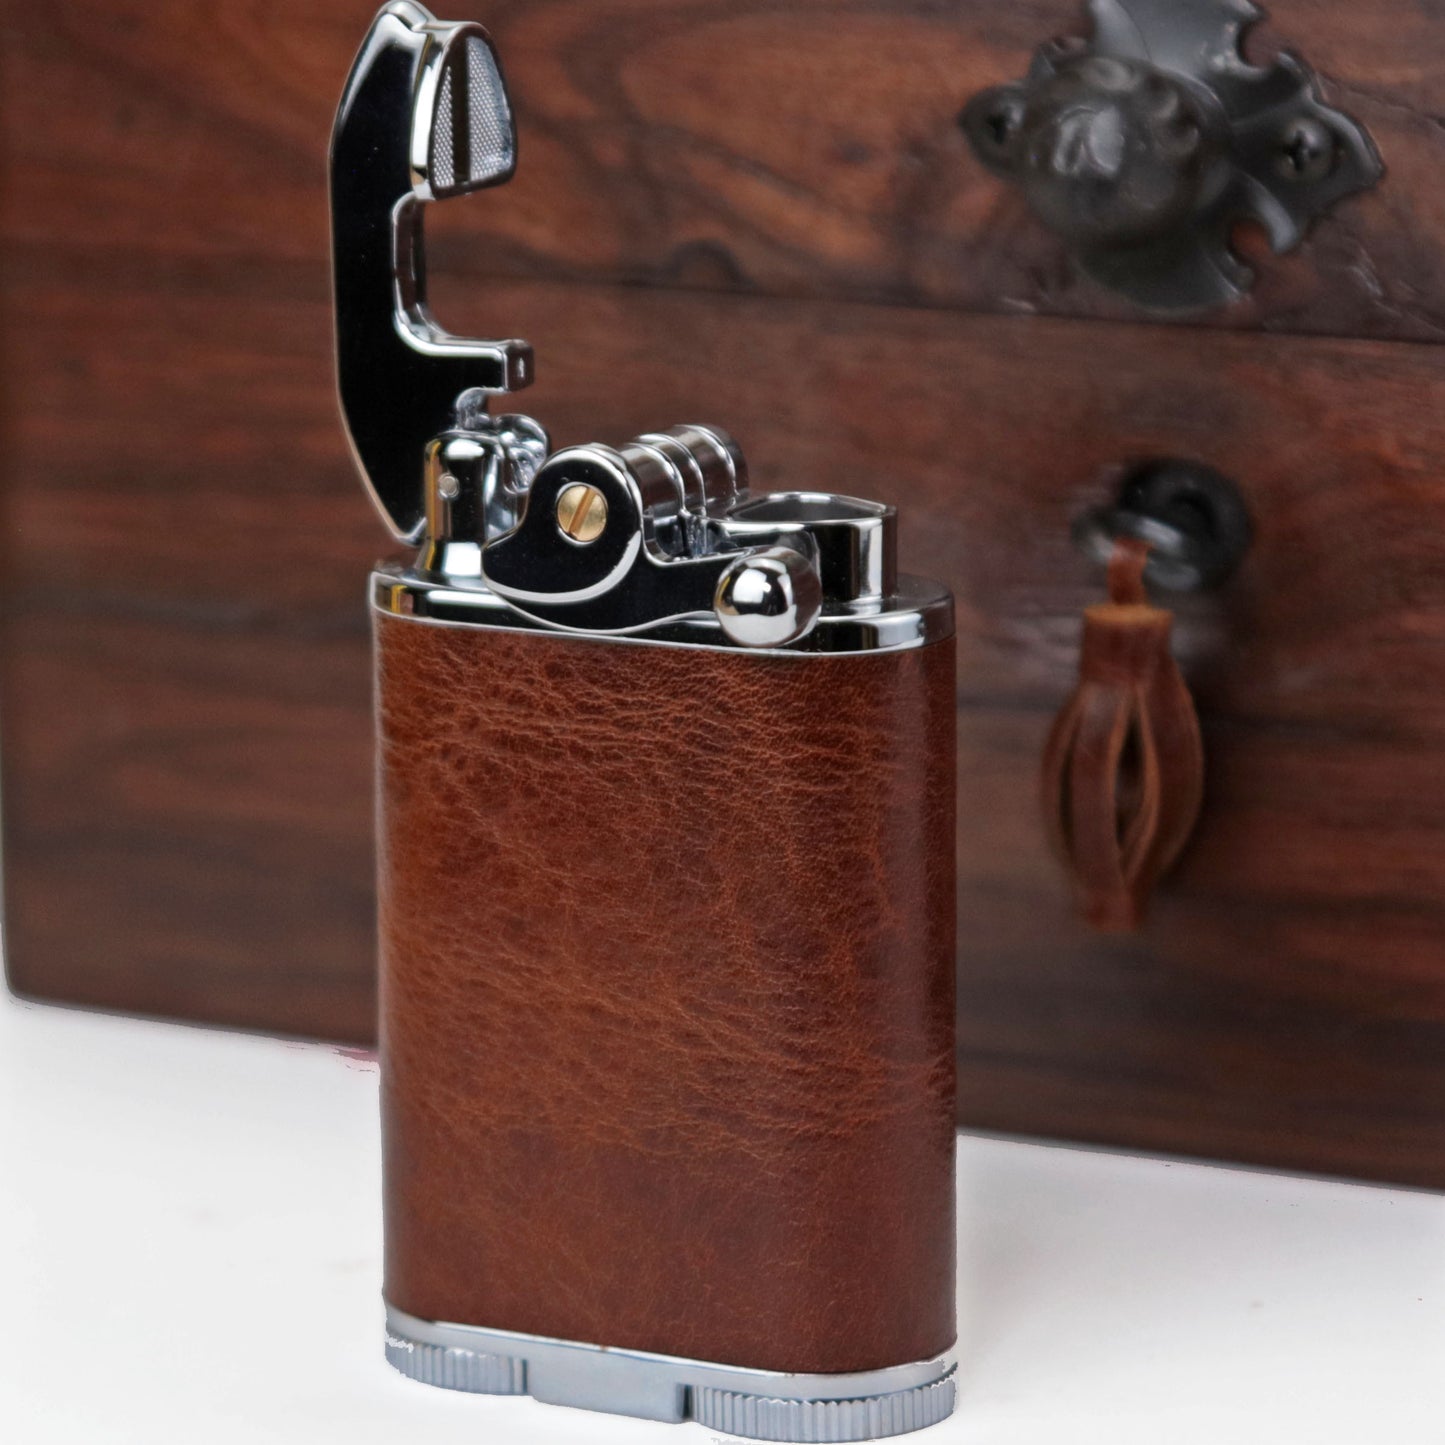 Brizard and Co Gatsby Table Lighter - Antique Saddle Leather